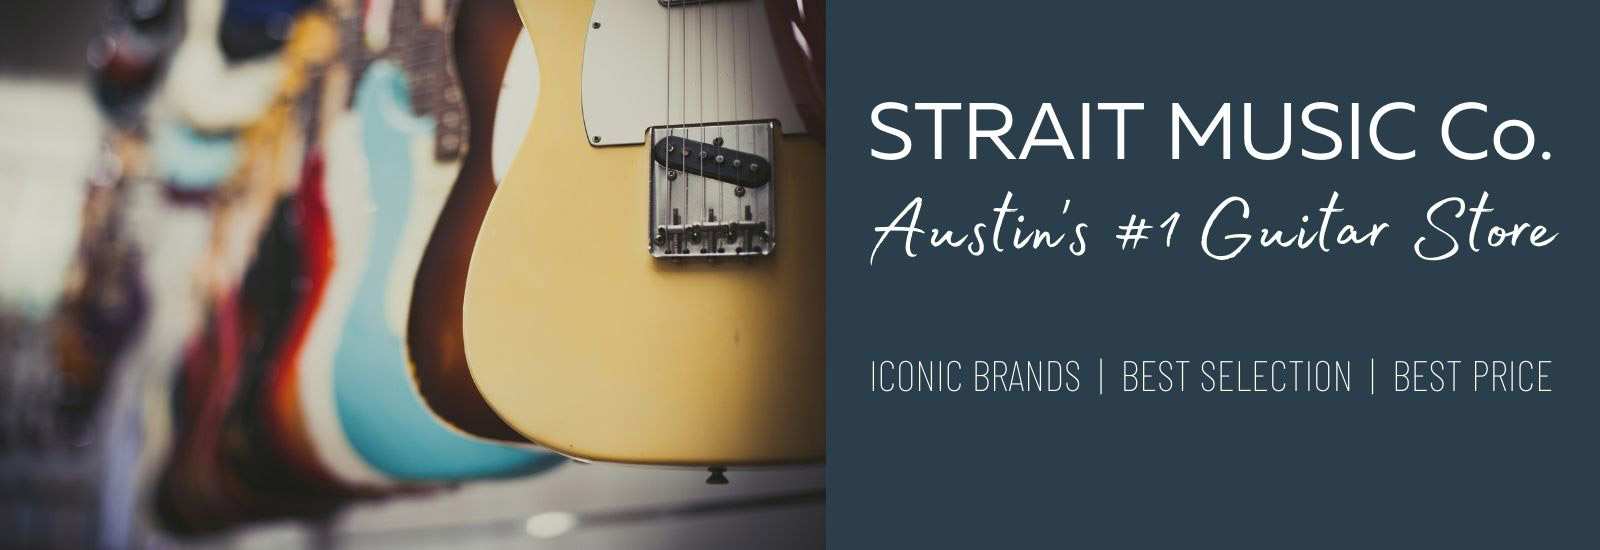 Strait Music Company Number One Guitar Store - Image of Electric Guitars